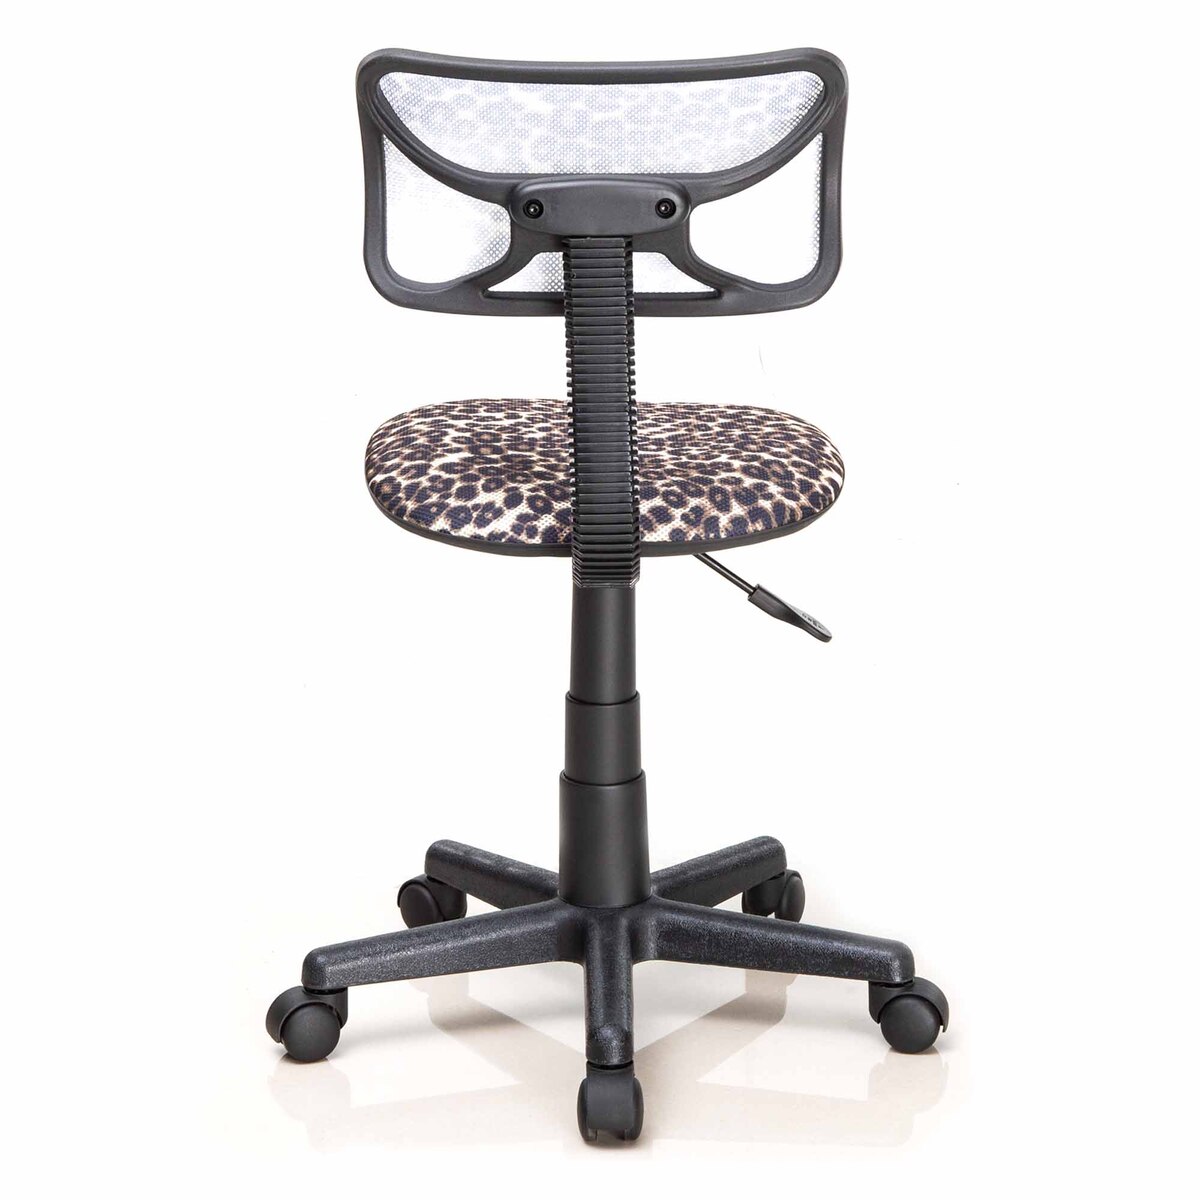 Maple Leaf Adjustable Kids Chair, Office, Computer Chair for Students With Swivel Wheels Leopard WK656377